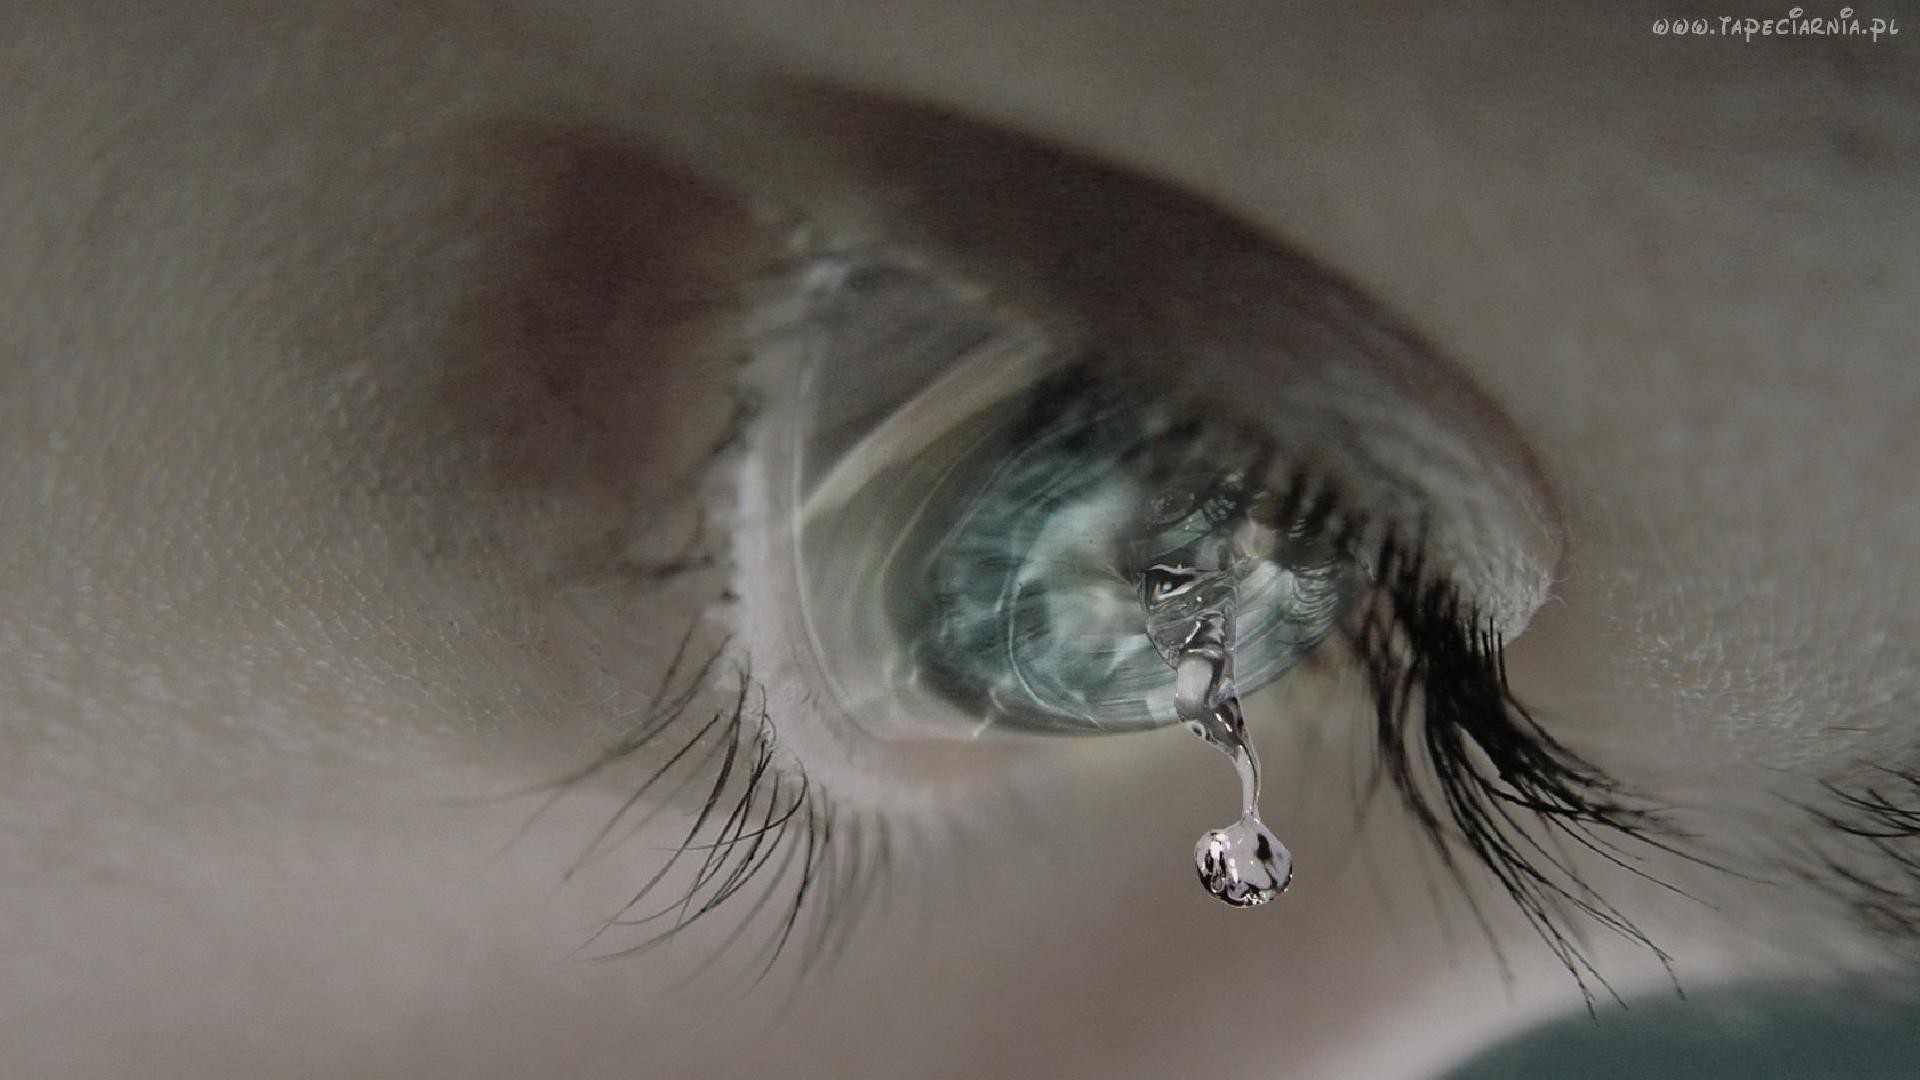  The tears which drip down from eyes 1920x1080